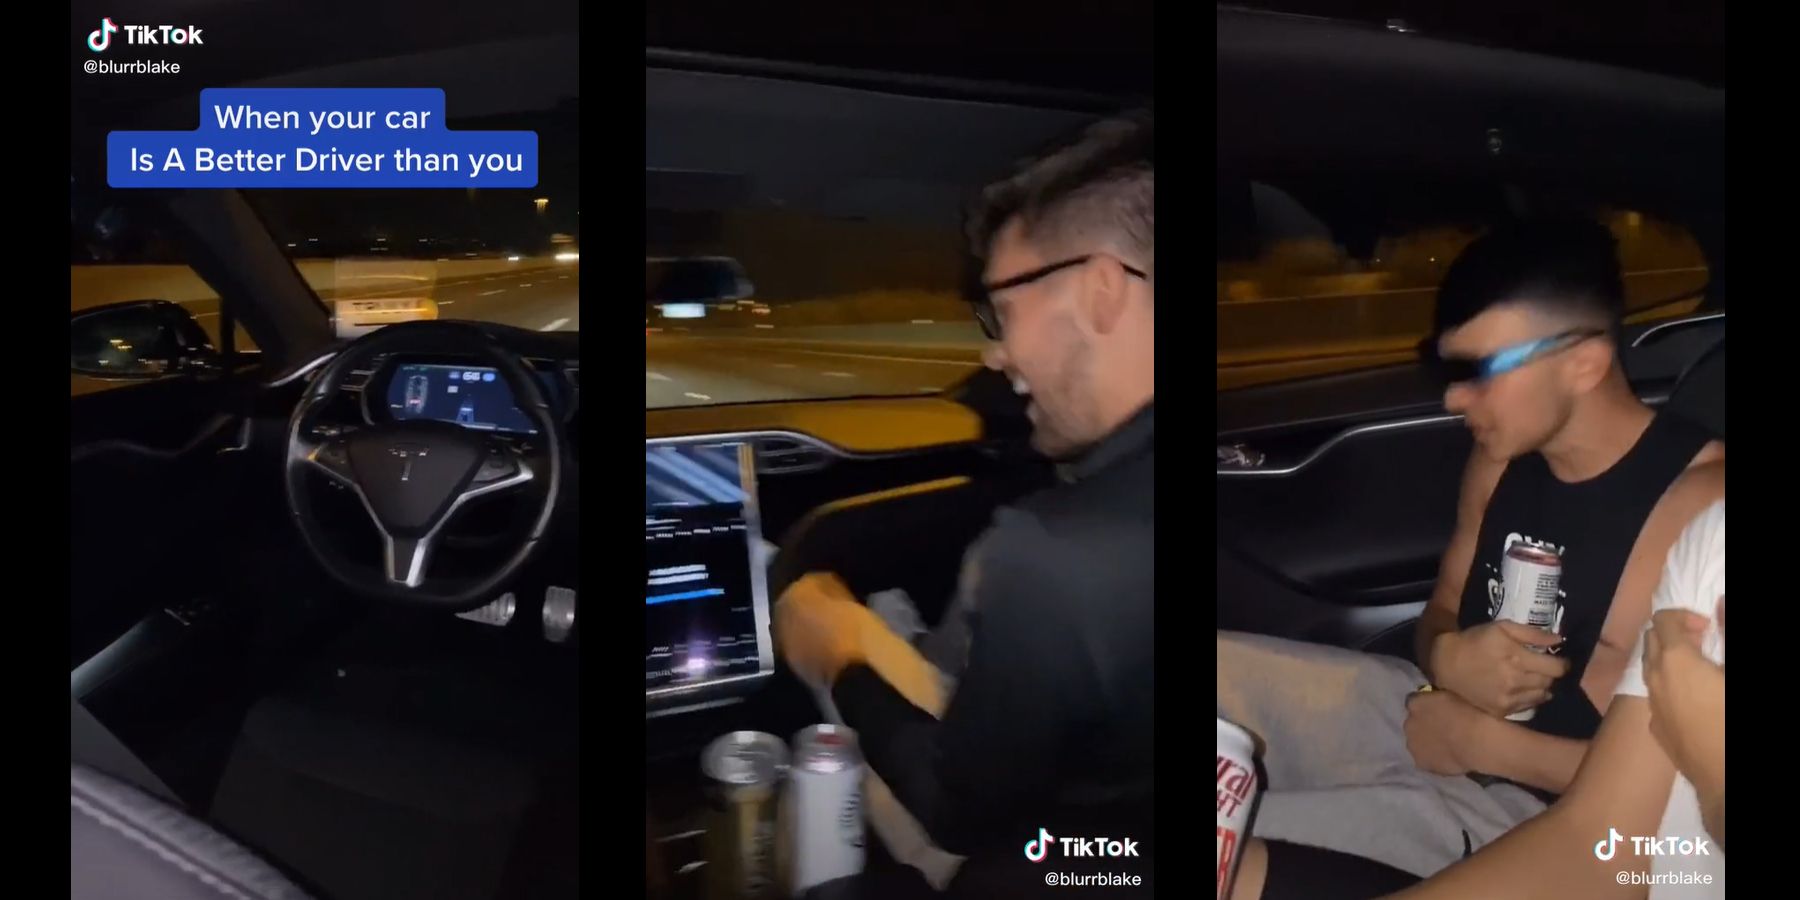 Screenshots of TikTok video showing Tesla operated with no-one in driver's seat